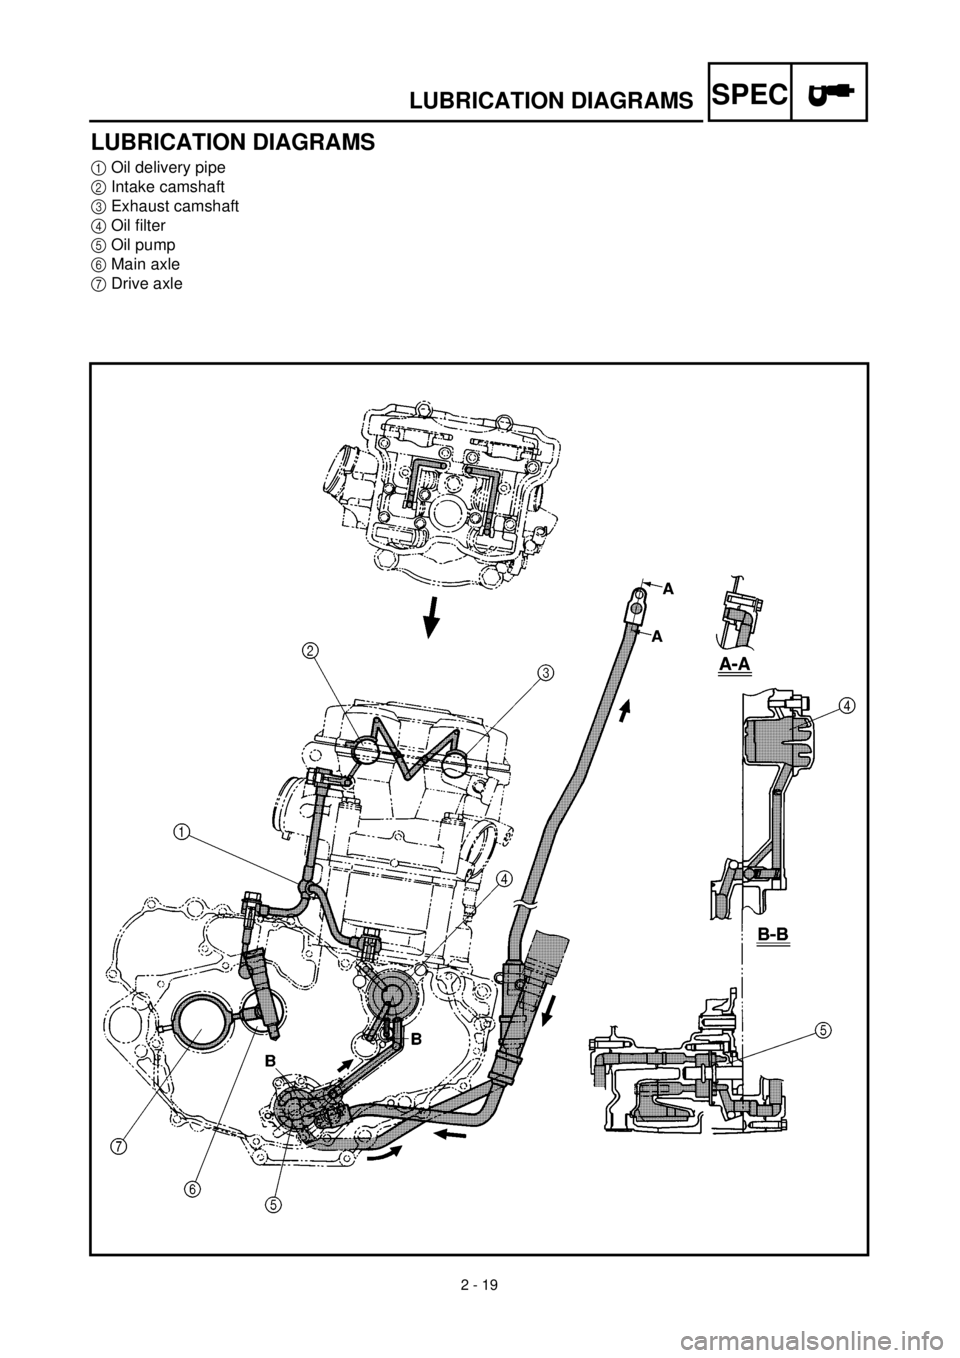 YAMAHA YZ426F 2000  Notices Demploi (in French)  
2 - 19
SPEC
 
LUBRICATION DIAGRAMS
LUBRICATION DIAGRAMS 
1 
Oil delivery pipe 
2 
Intake camshaft 
3 
Exhaust camshaft 
4 
Oil filter 
5 
Oil pump 
6 
Main axle 
7 
Drive axle 